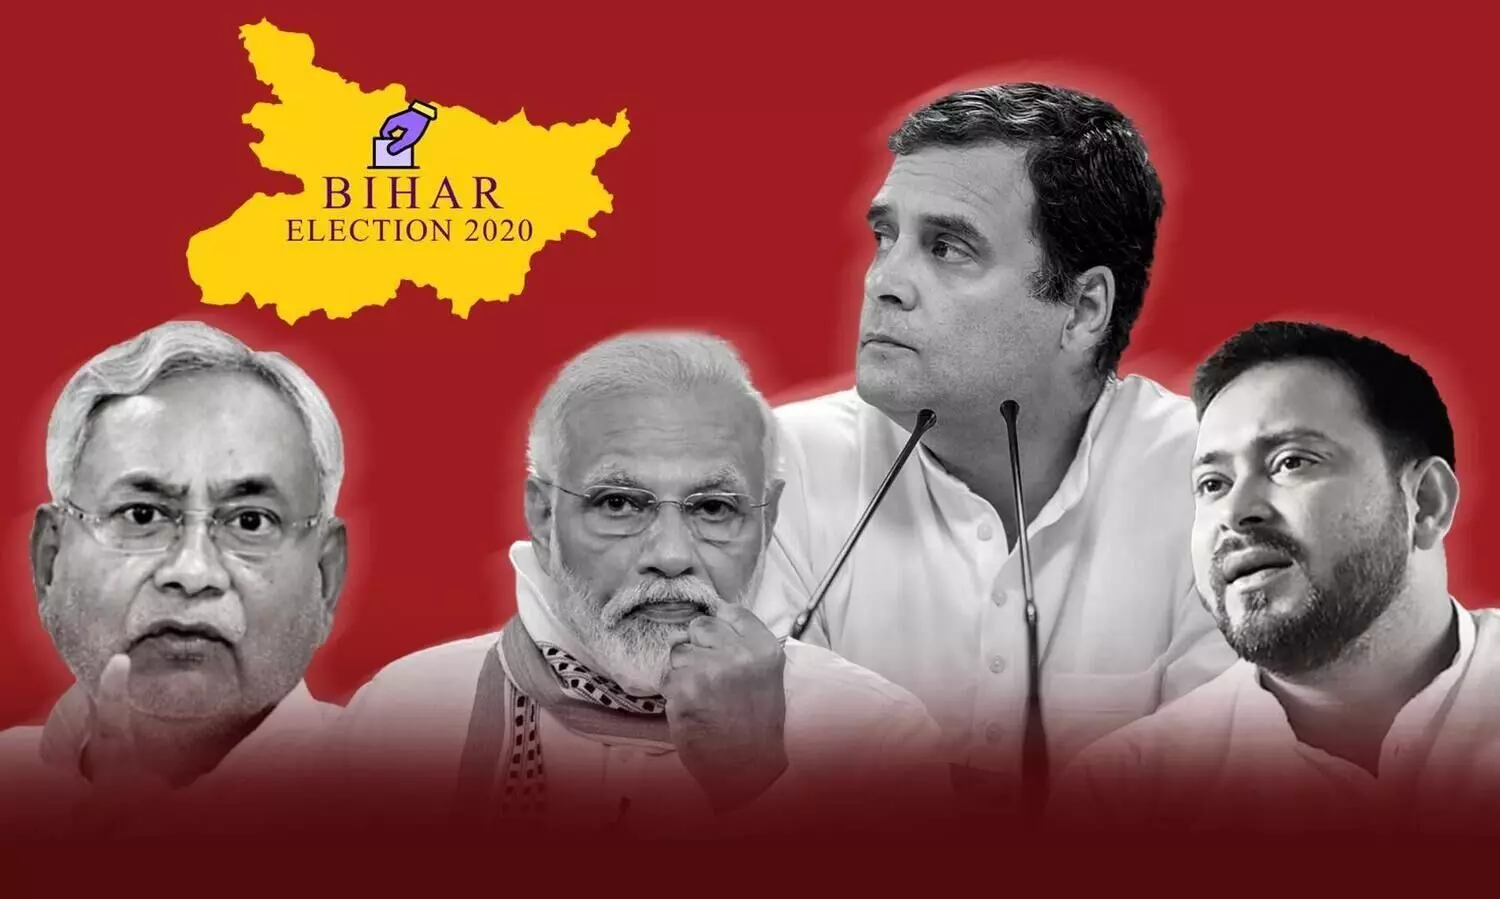 Bihar: The poll that redefined political equations